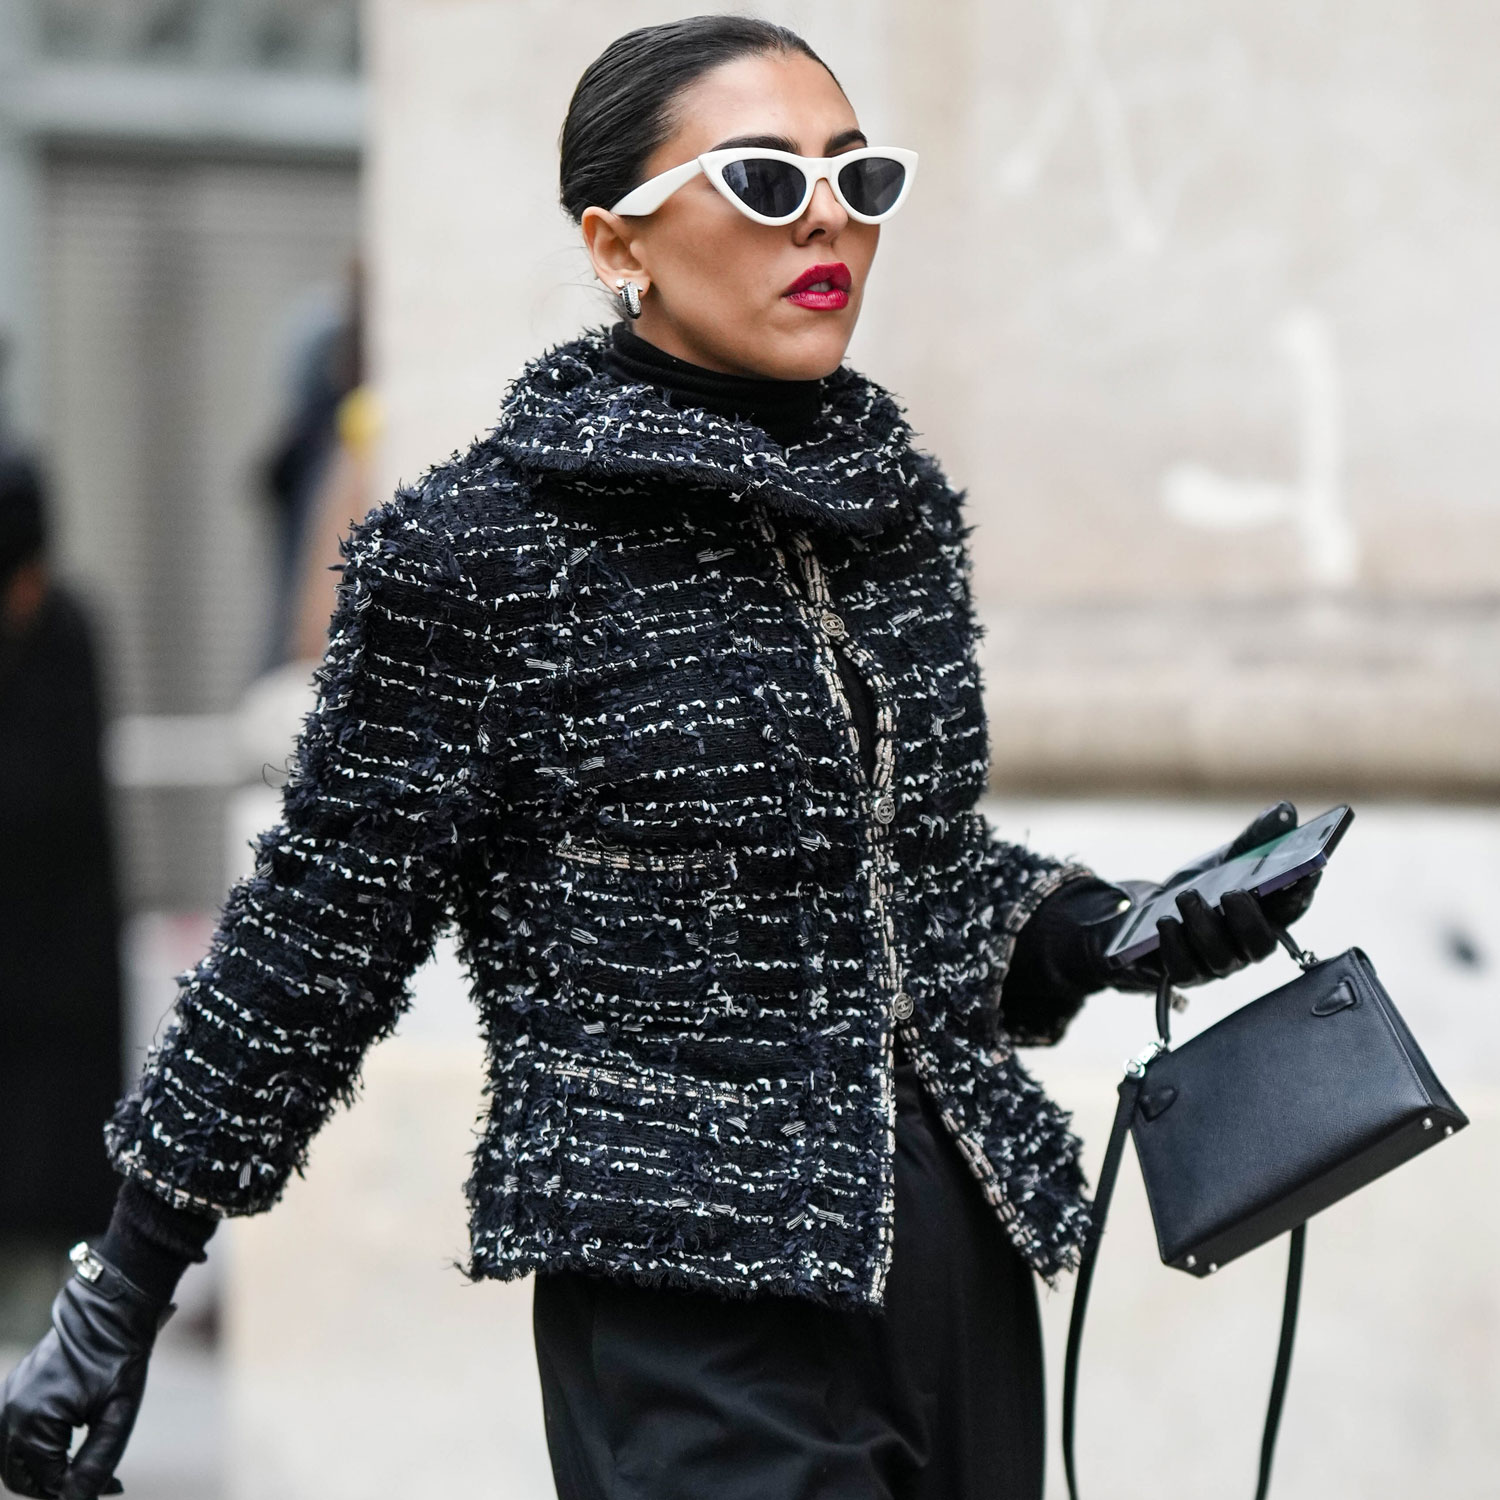 A Brief History on the Iconic Chanel Jacket